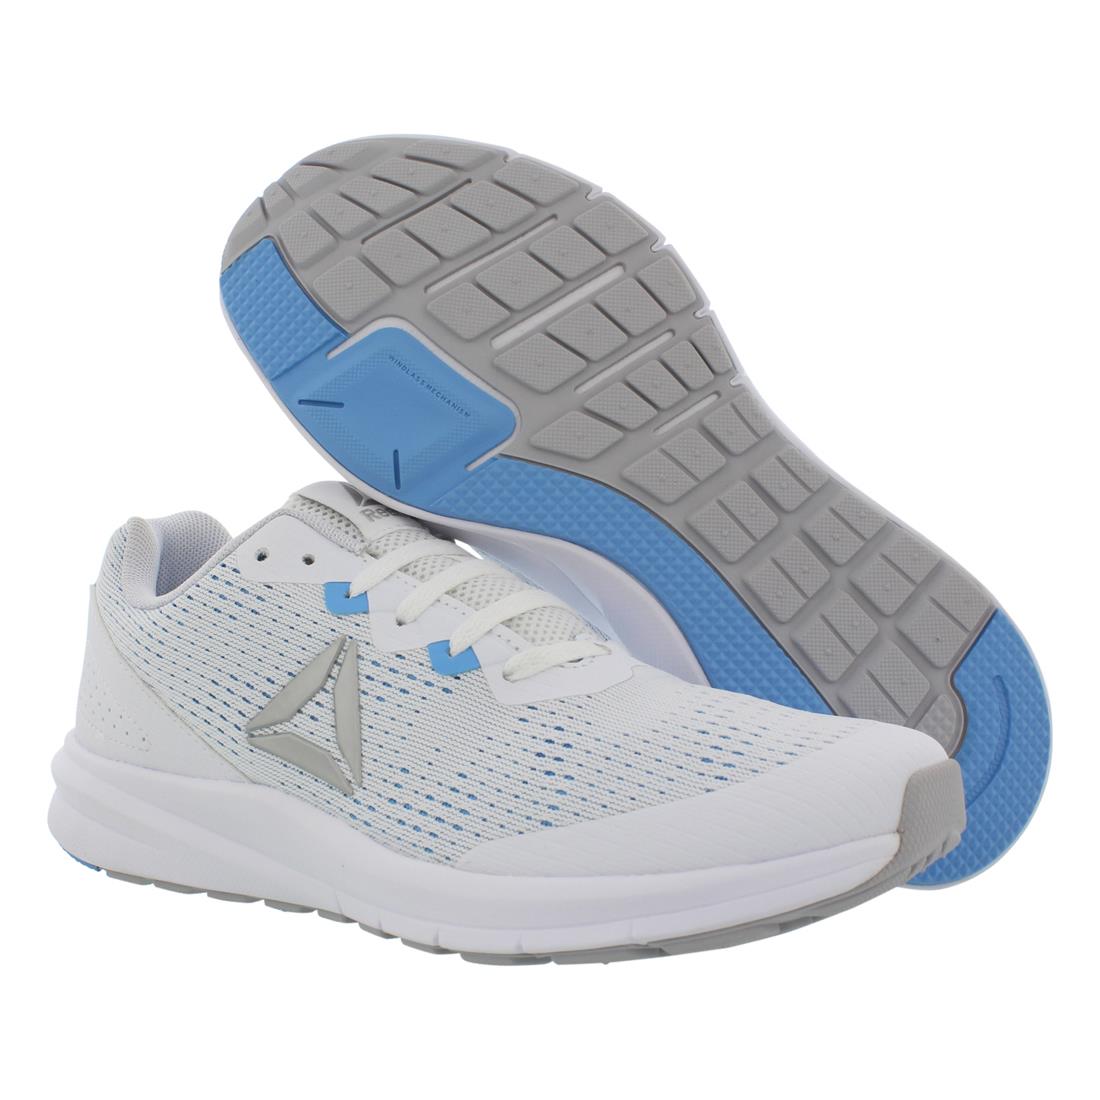 Reebok Runner 3.0 Womens Shoes Synthetic-And-Rubber